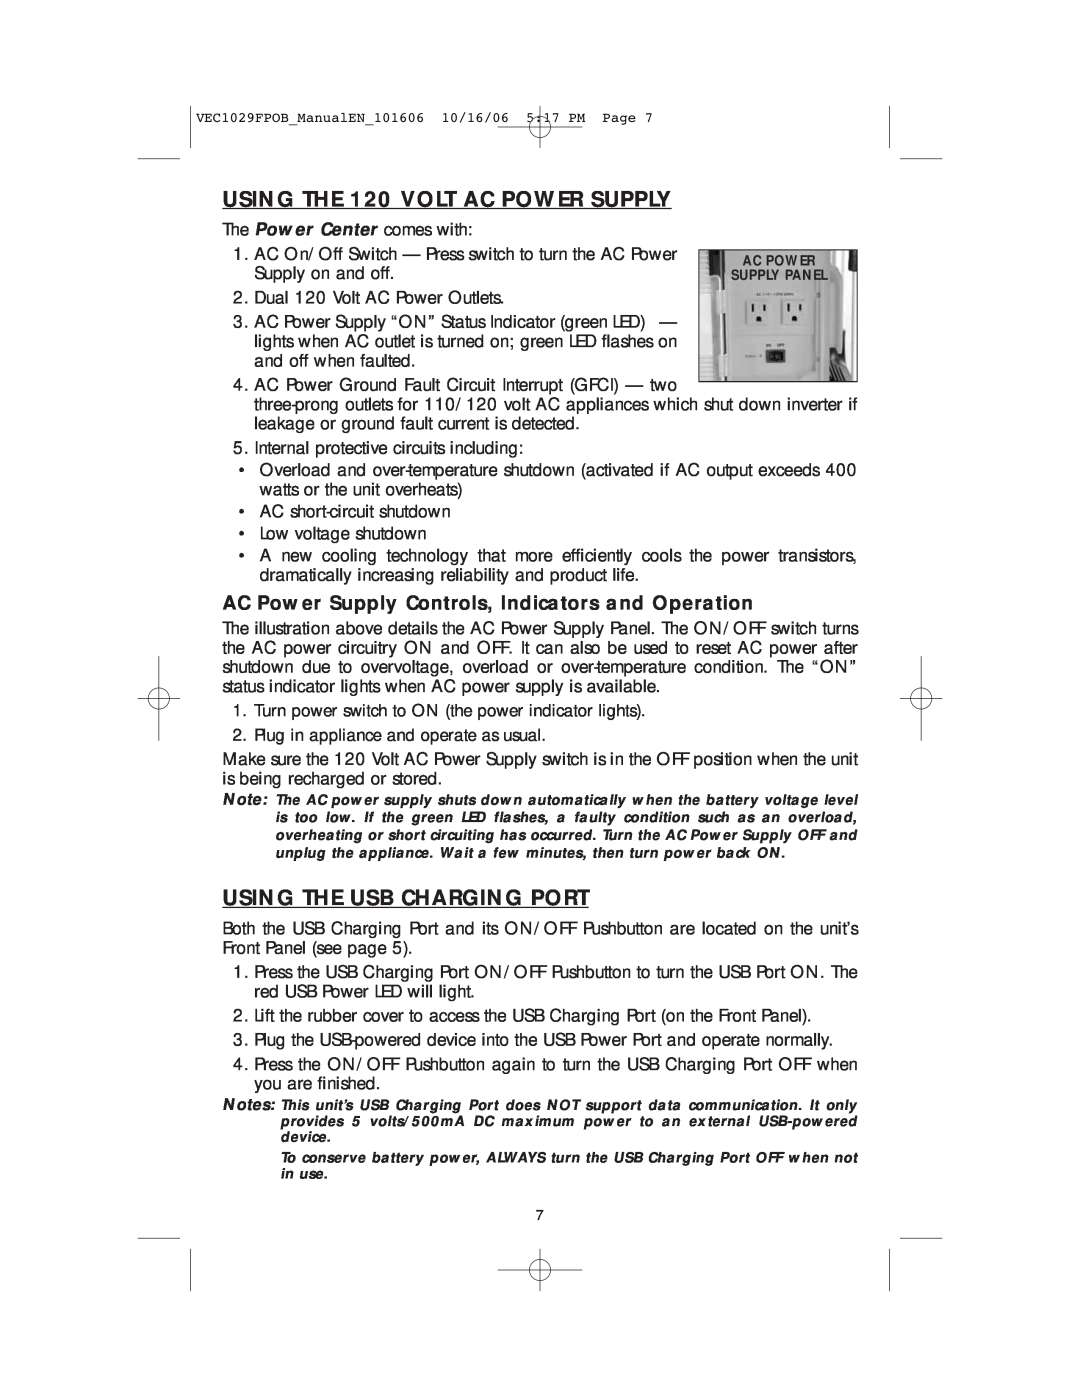 Energy Tech Laboratories VEC1029FPOB user manual USING THE 120 VOLT AC POWER SUPPLY, Using The Usb Charging Port 